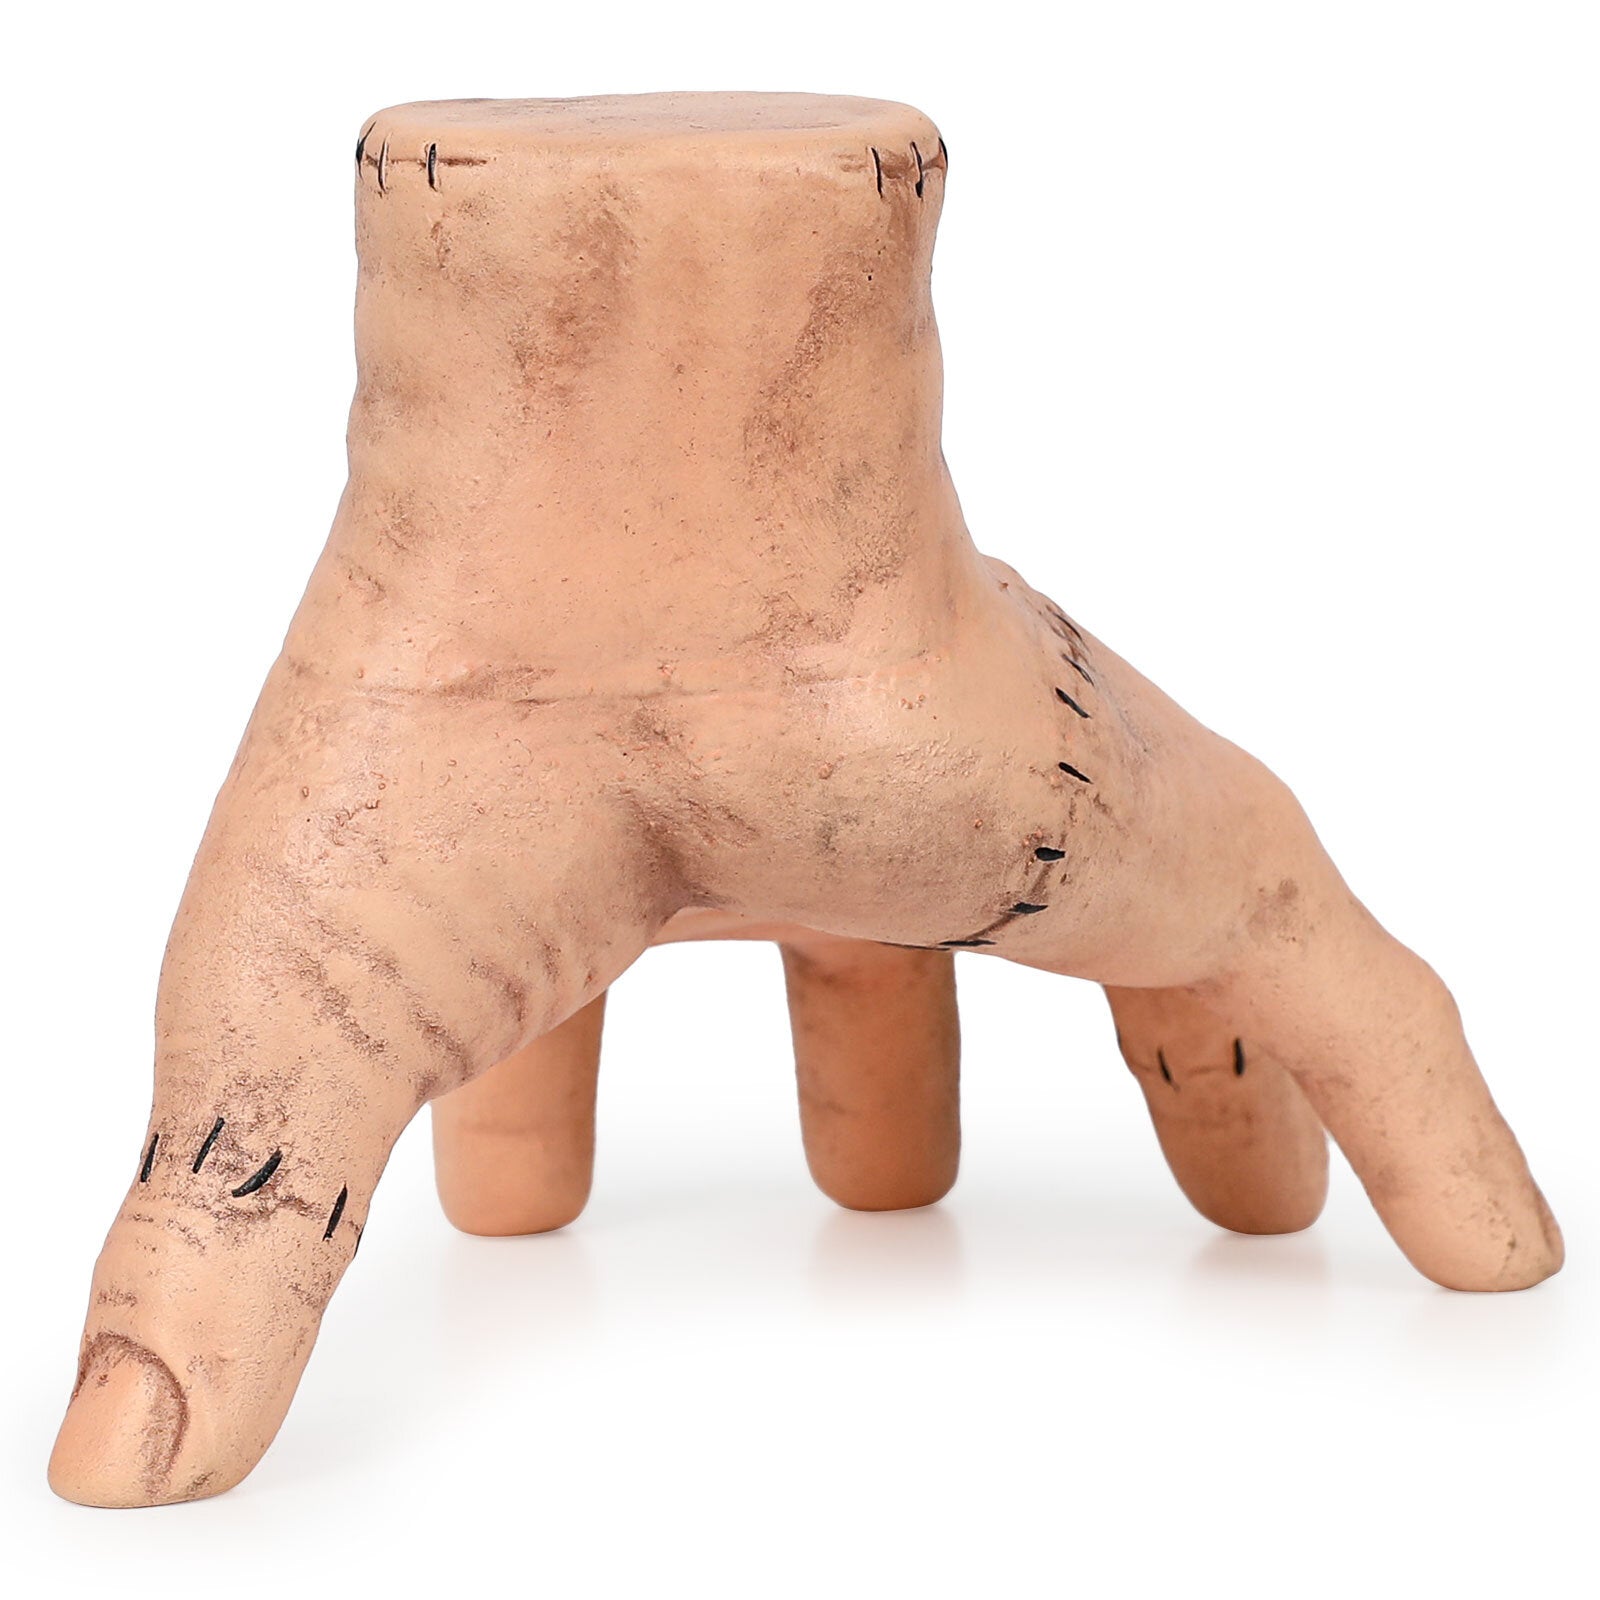 Addams Family 'Thing' Hand - Prop (Wednesday Netflix)